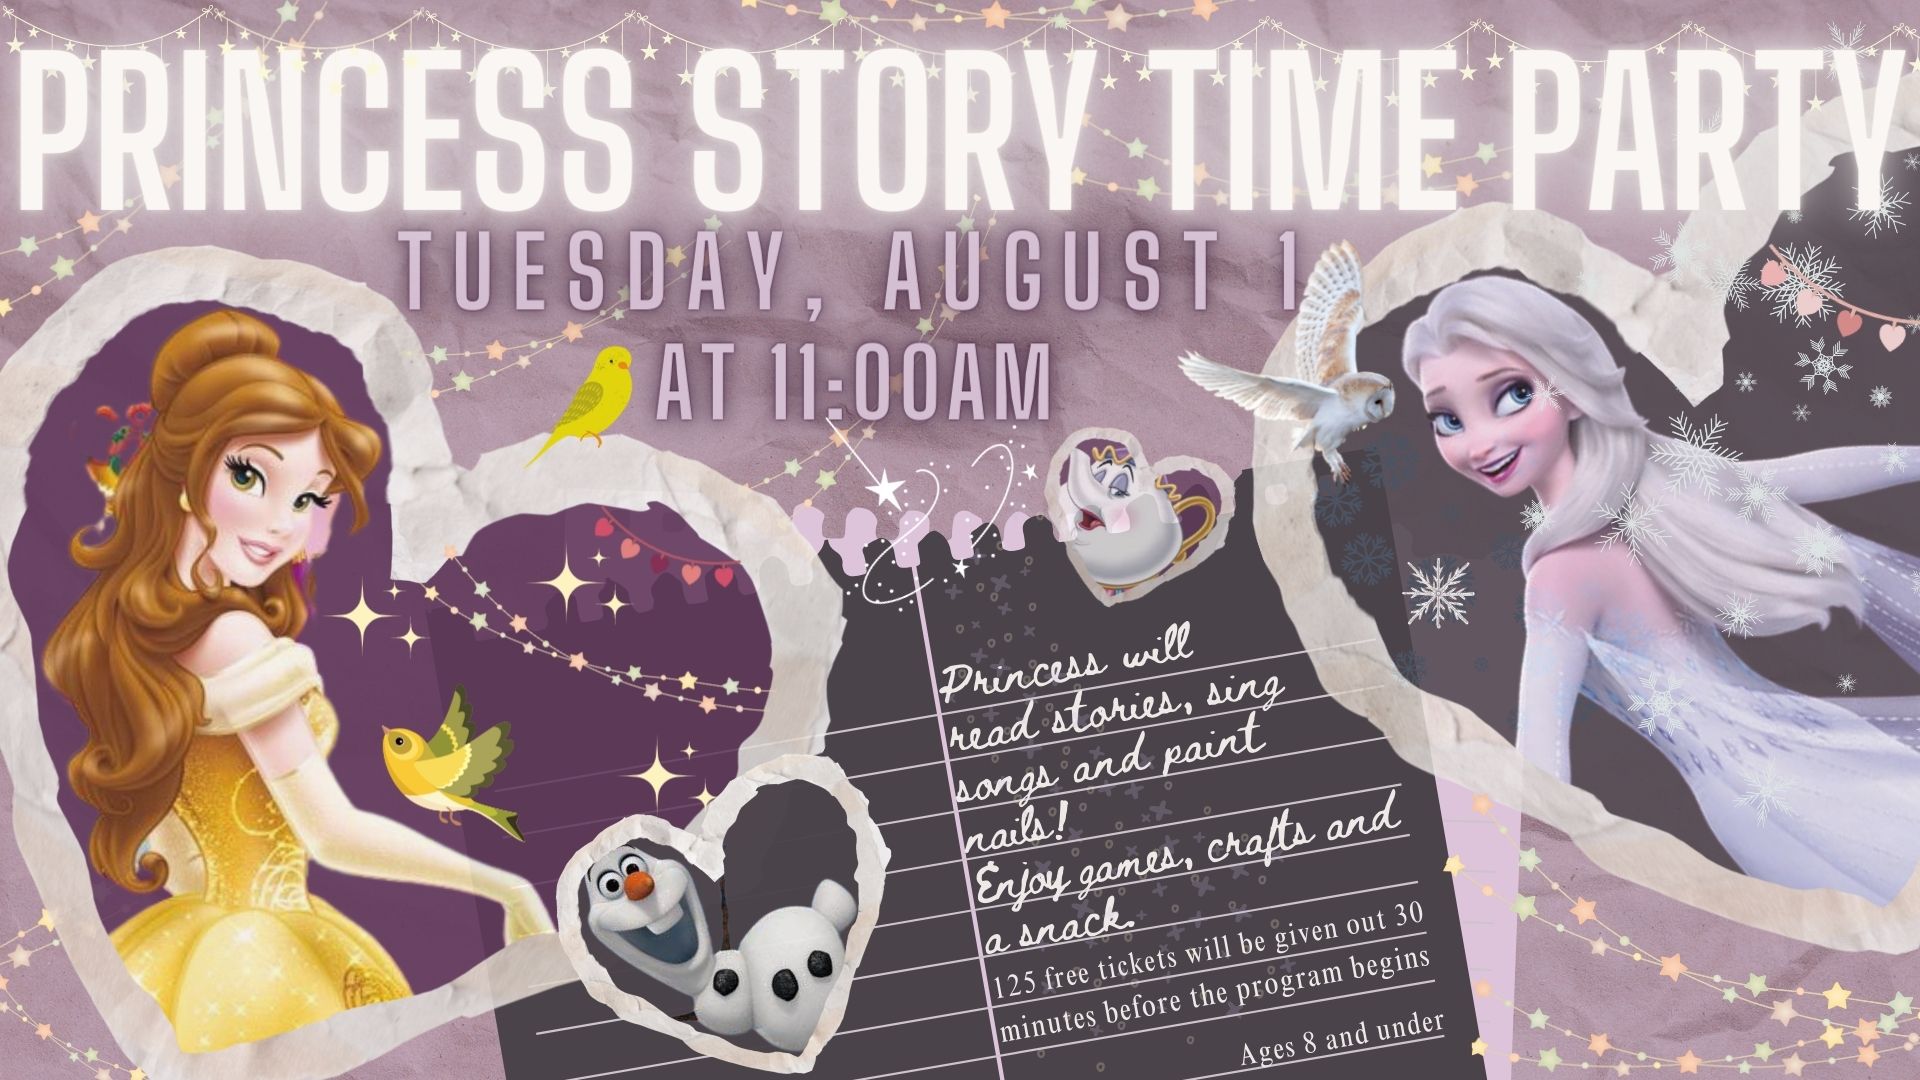 Princess Story Time & Sing-Along Party